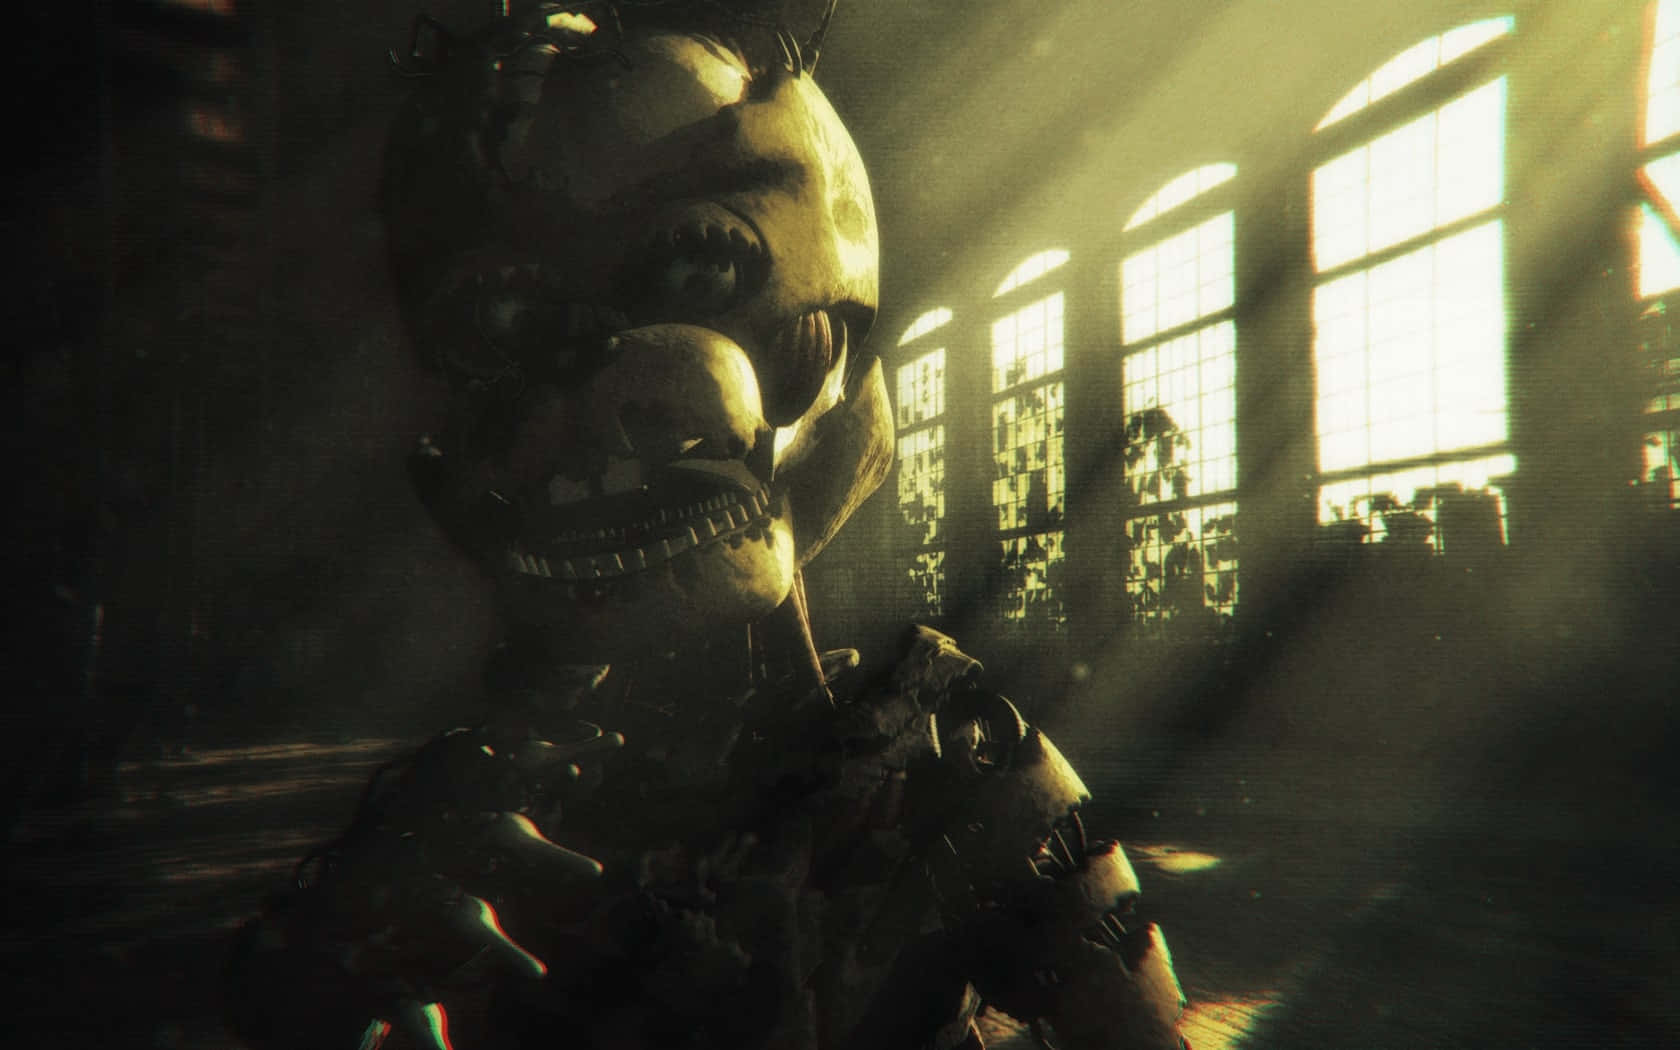 A tense confrontation between Scraptrap and an opponent in the game environment Wallpaper